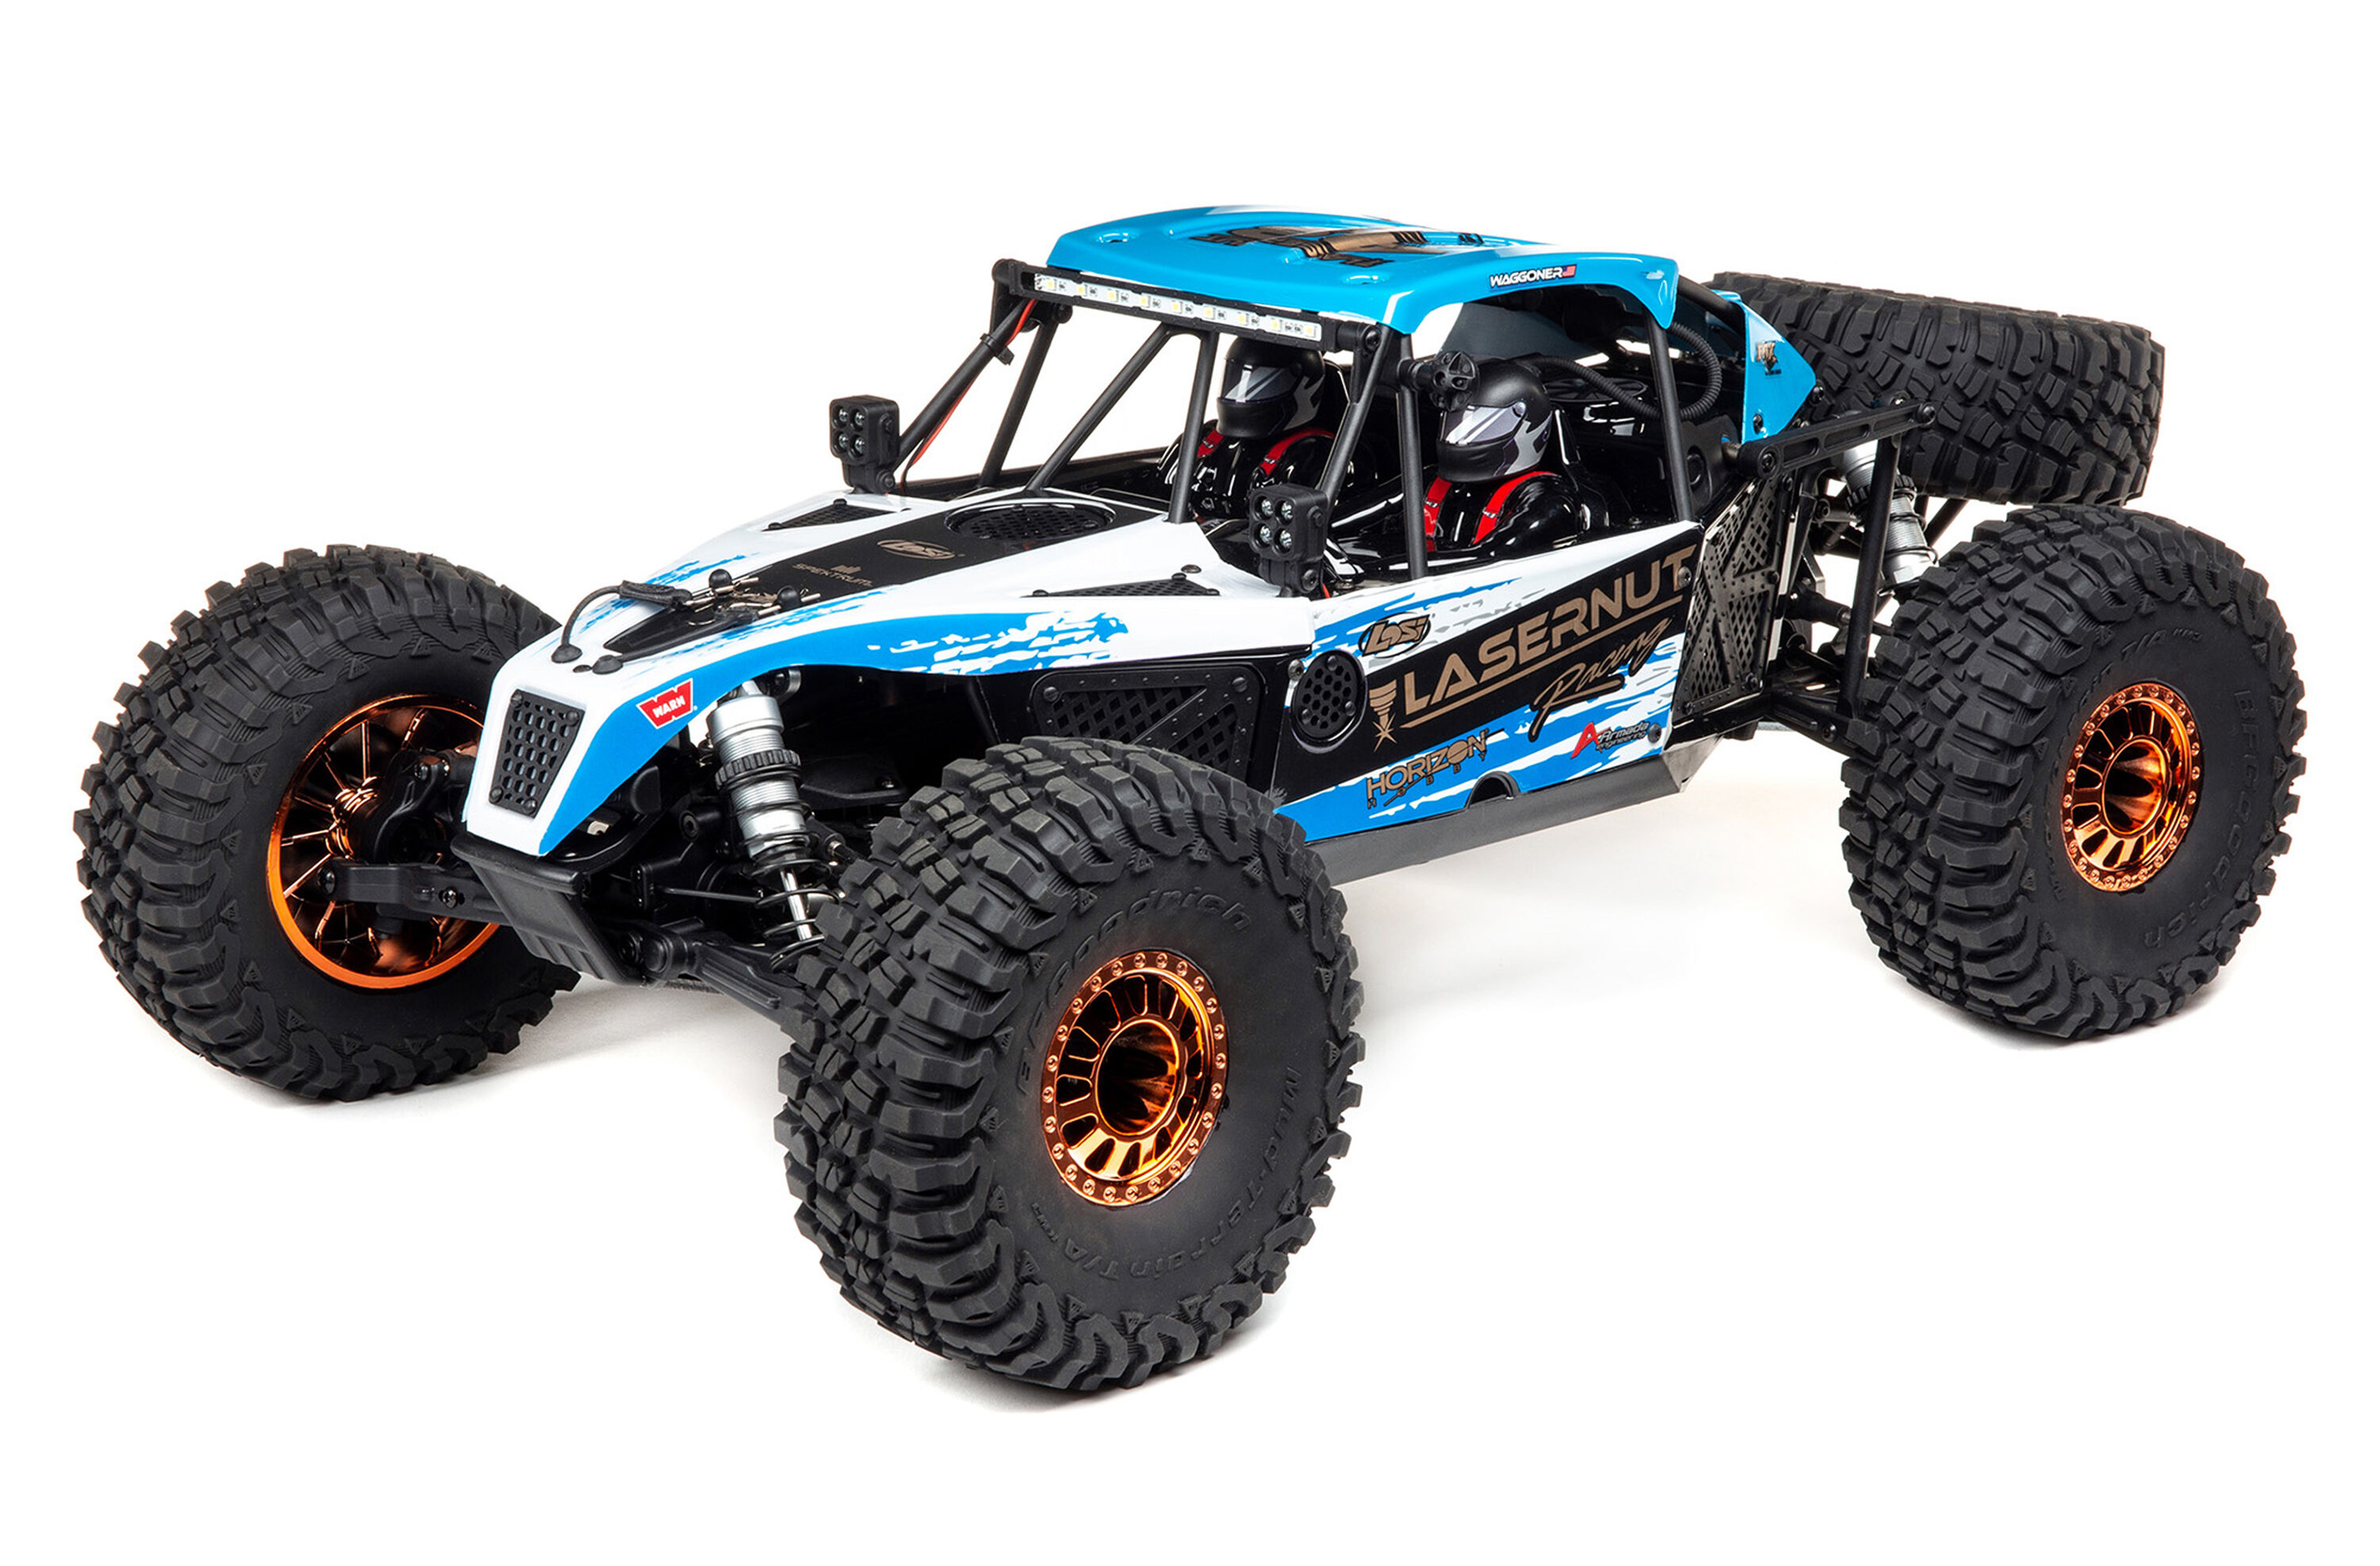 LOS03028T1 Losi Lasernut U4 4WD Brushless RTR with Smart ESC 1/10, Blue